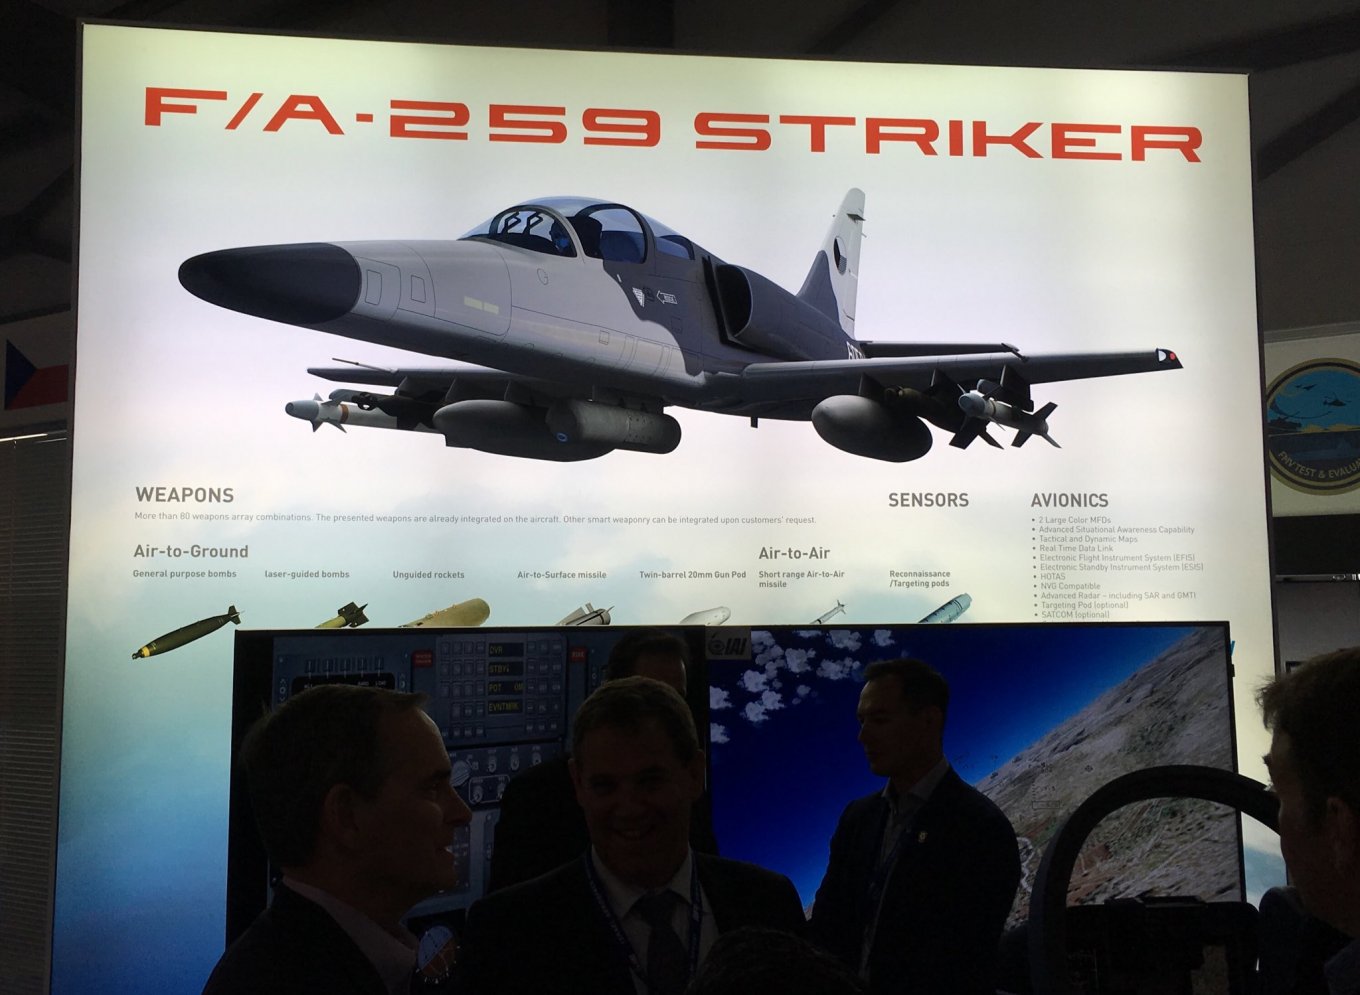 The first presentation of the F/A-259 at the aircraft forum in Farnborough, 2018